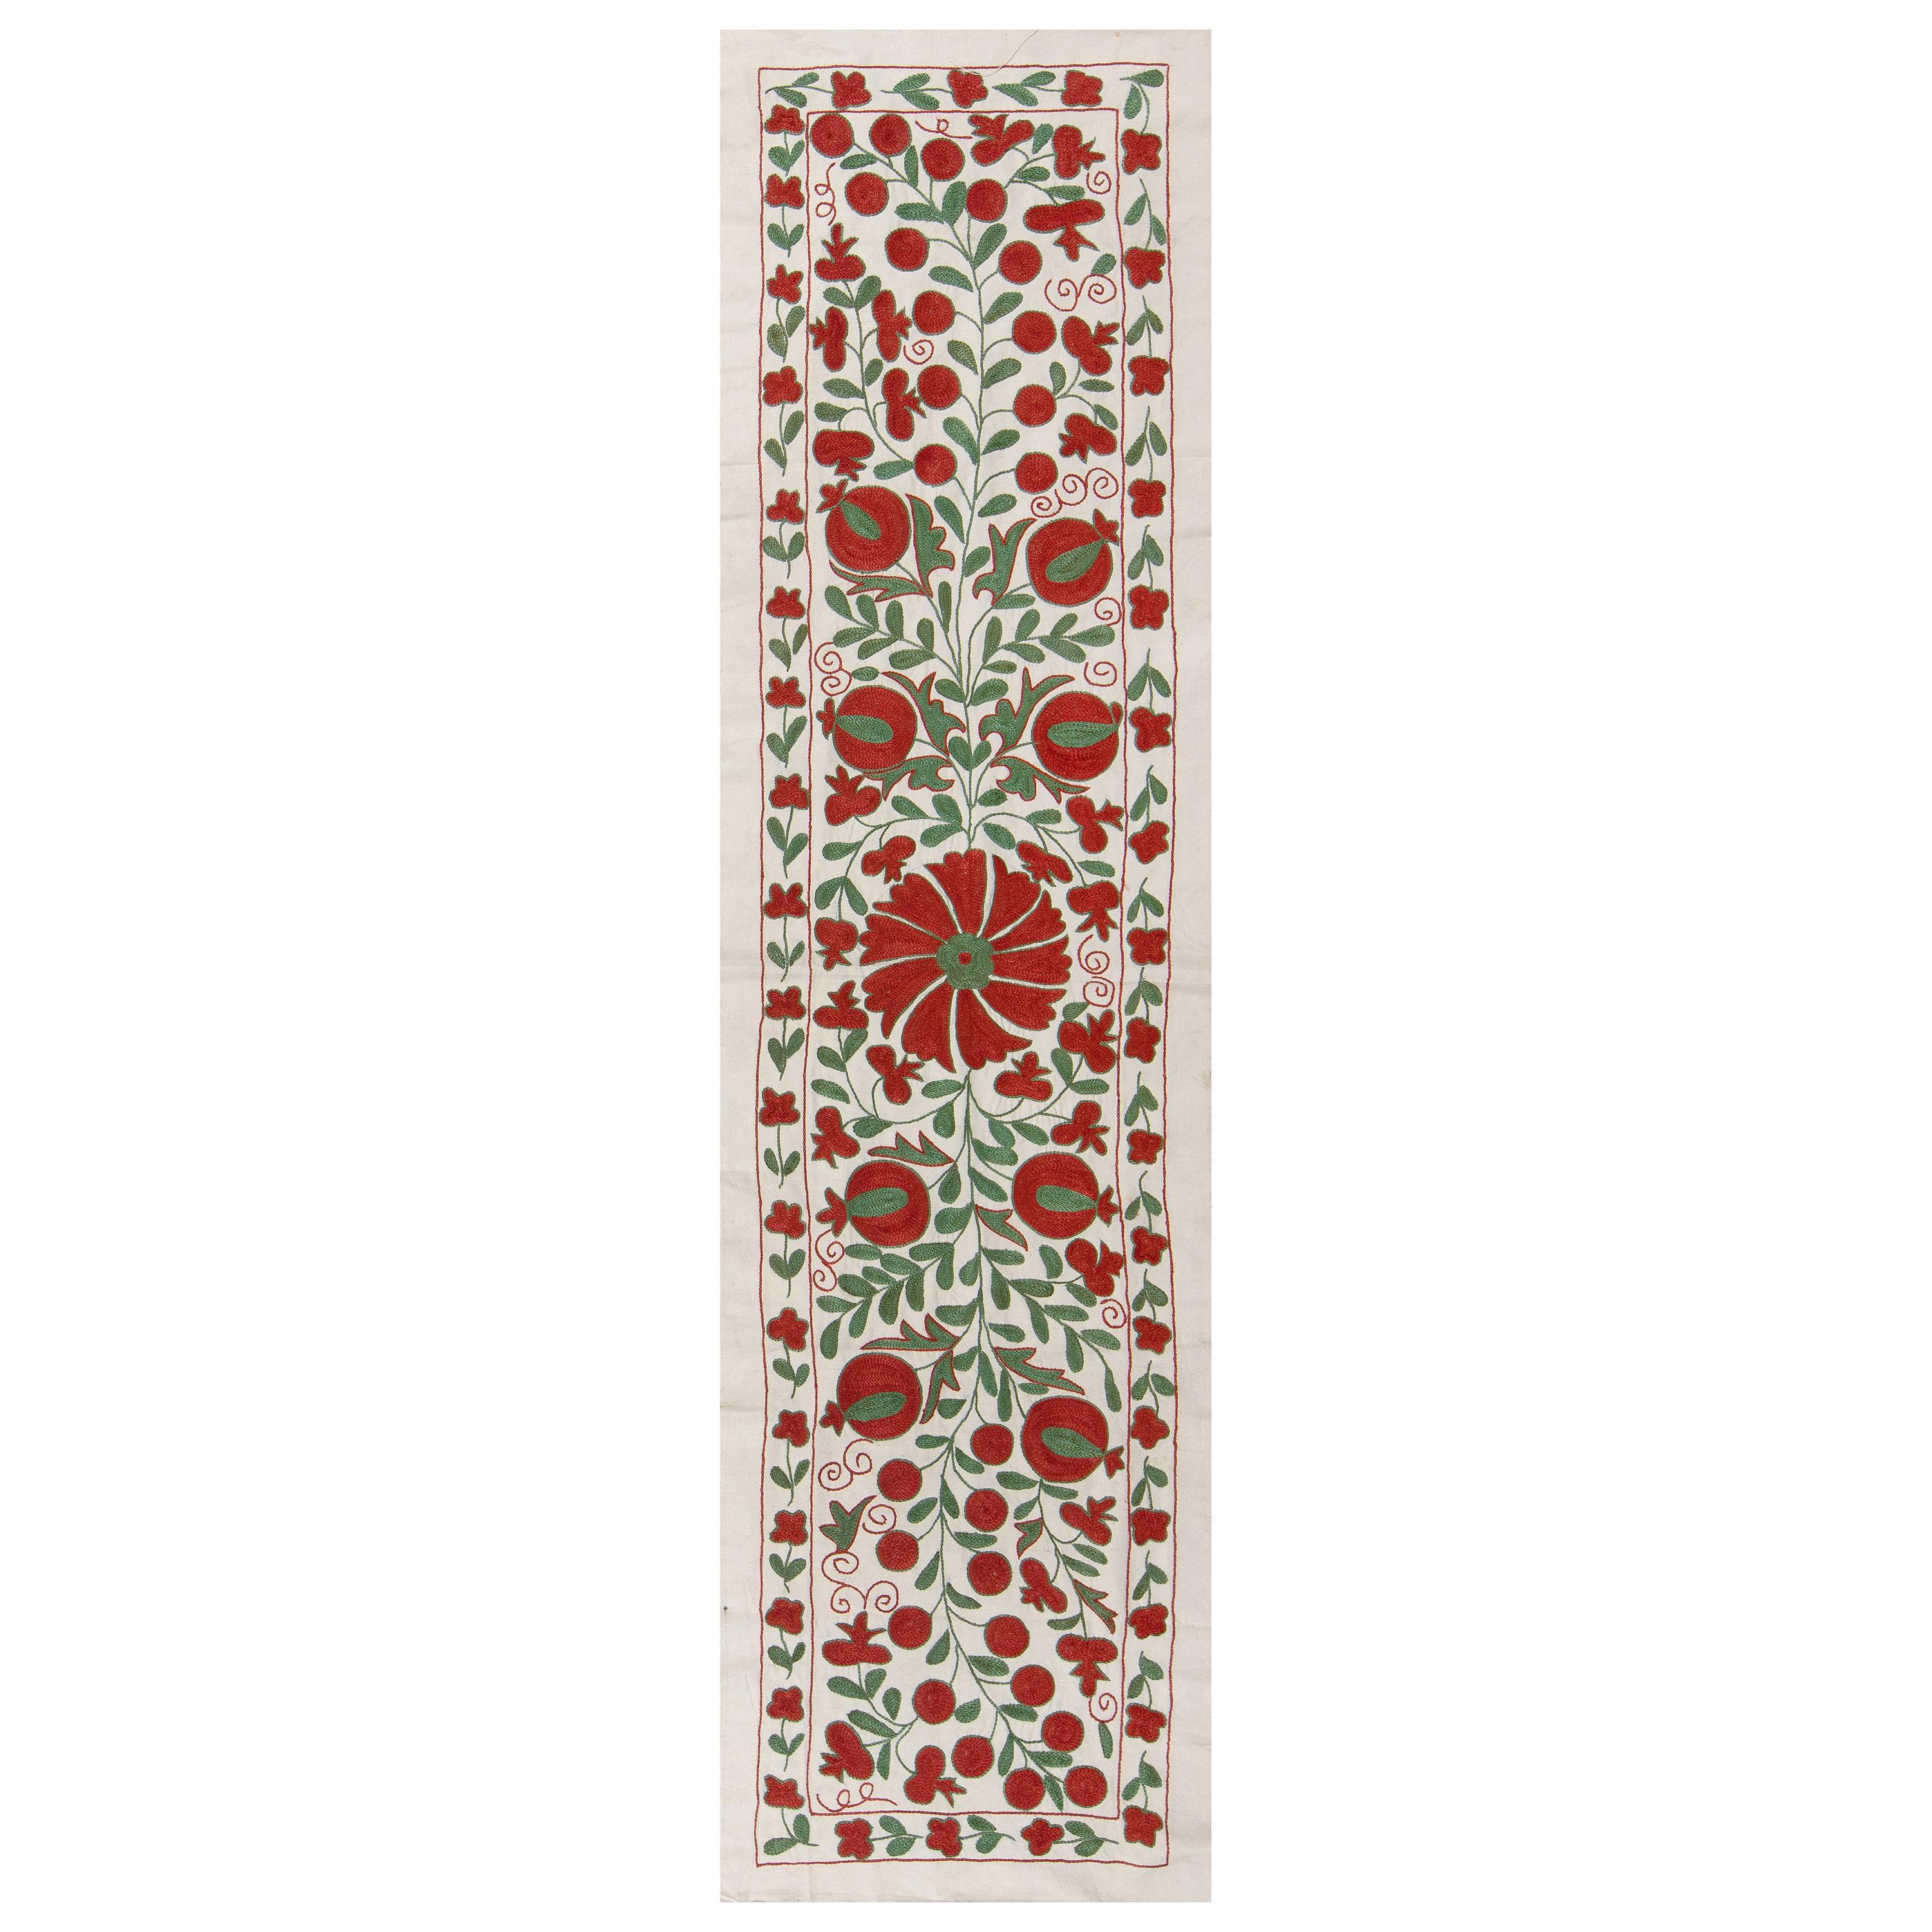 1.7x6.2 Ft Suzani Embroidered Cotton & Silk Wall Hanging, Decorative Tablecloth For Sale